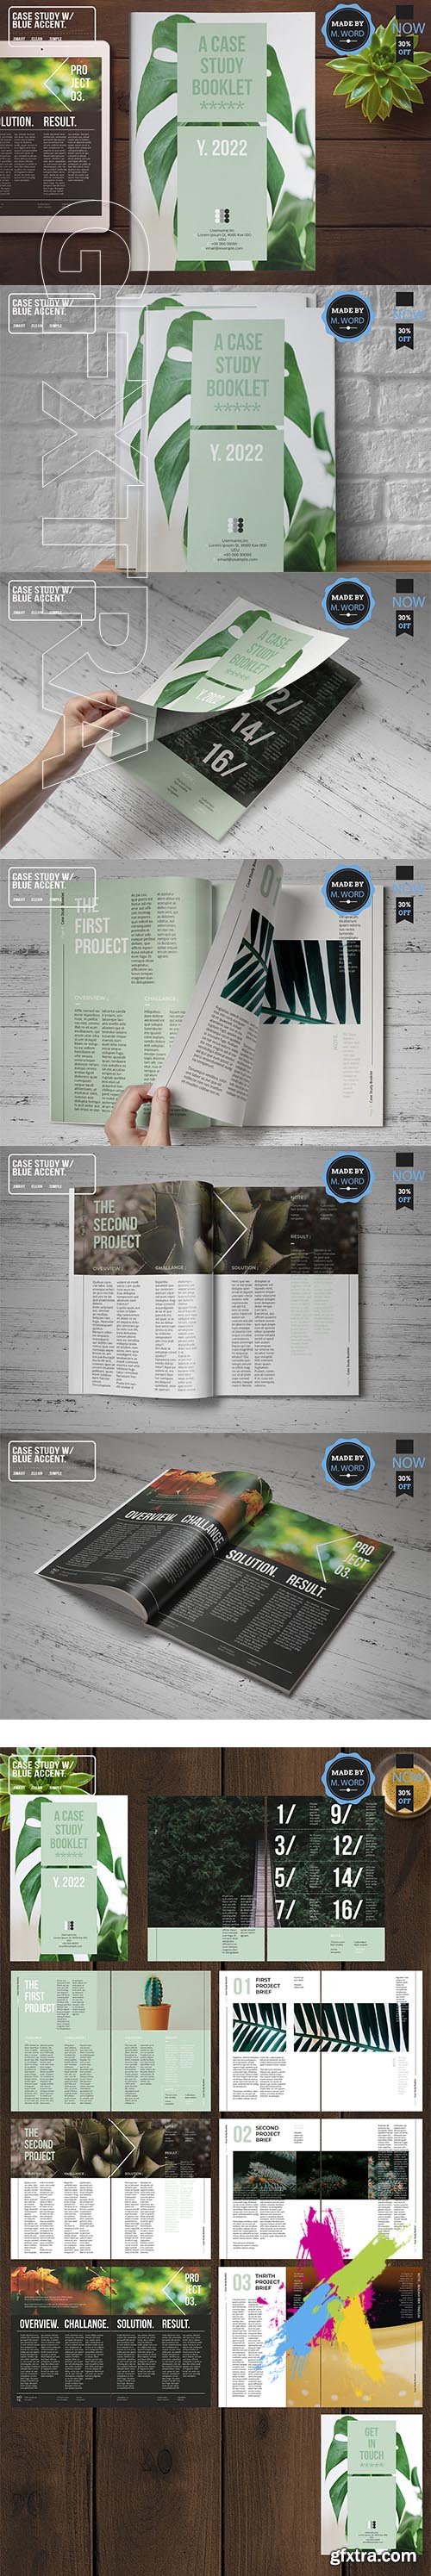 CreativeMarket - Case Study With Blue Accent Layout 3689104